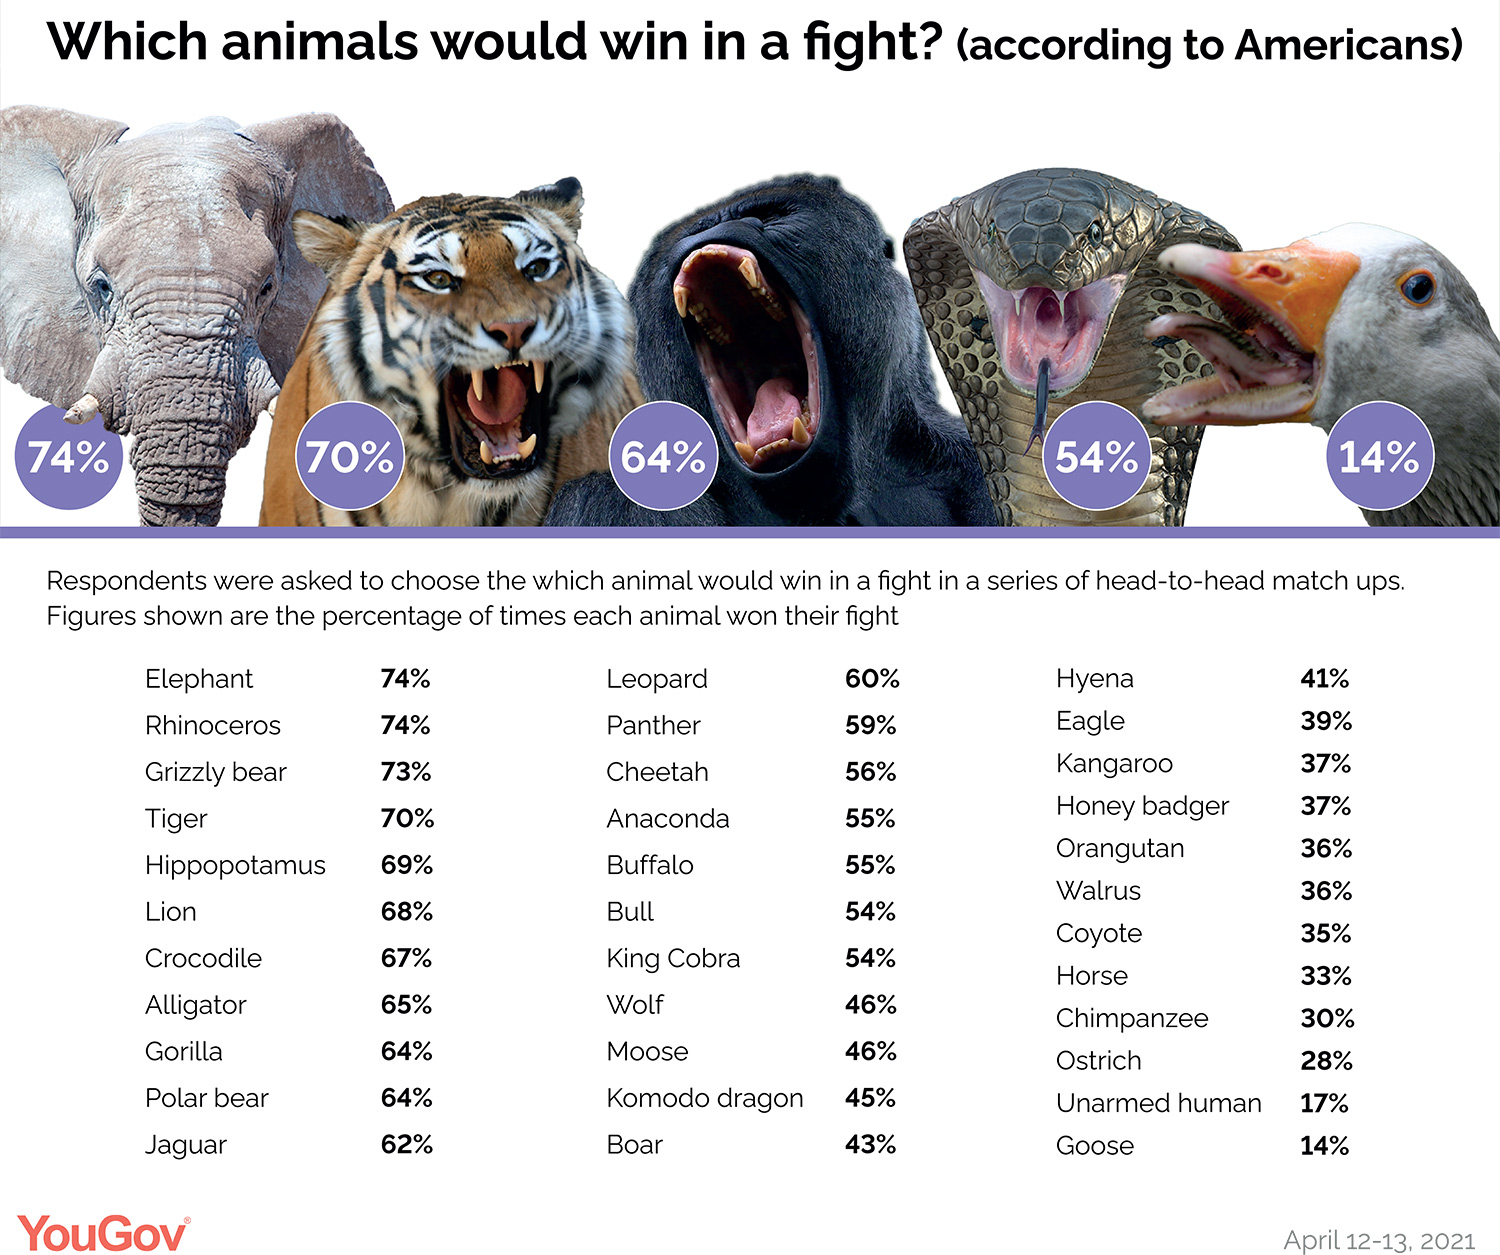 Rumble in the jungle: what animals would win in a fight? | YouGov